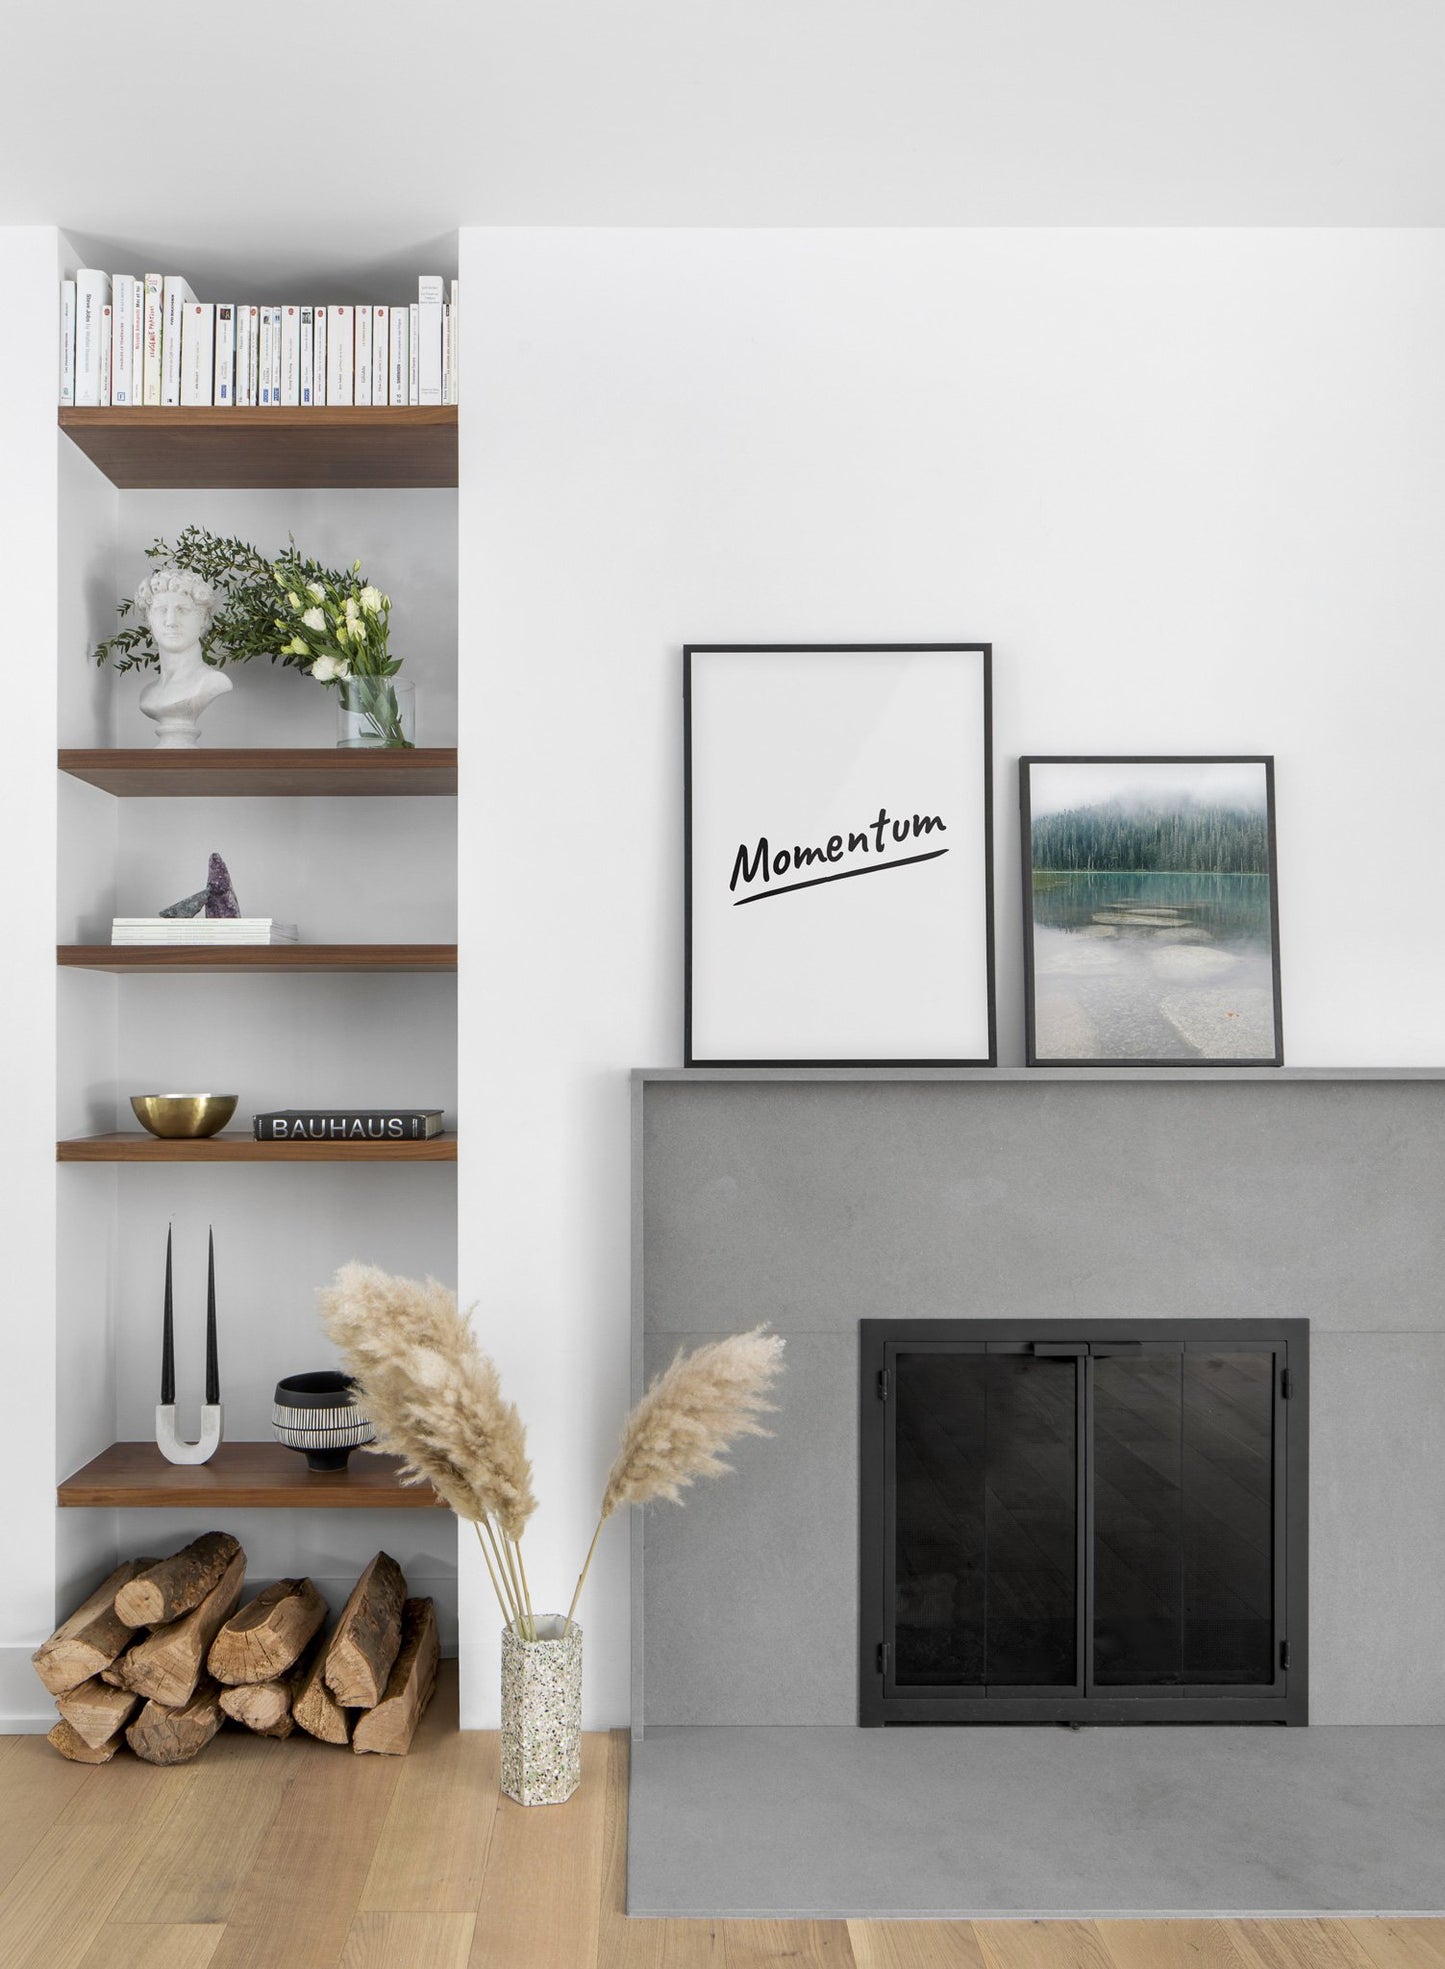 Scandinavian poster by Opposite Wall with black and white graphic typography design of Momentum - Living room with a fireplace